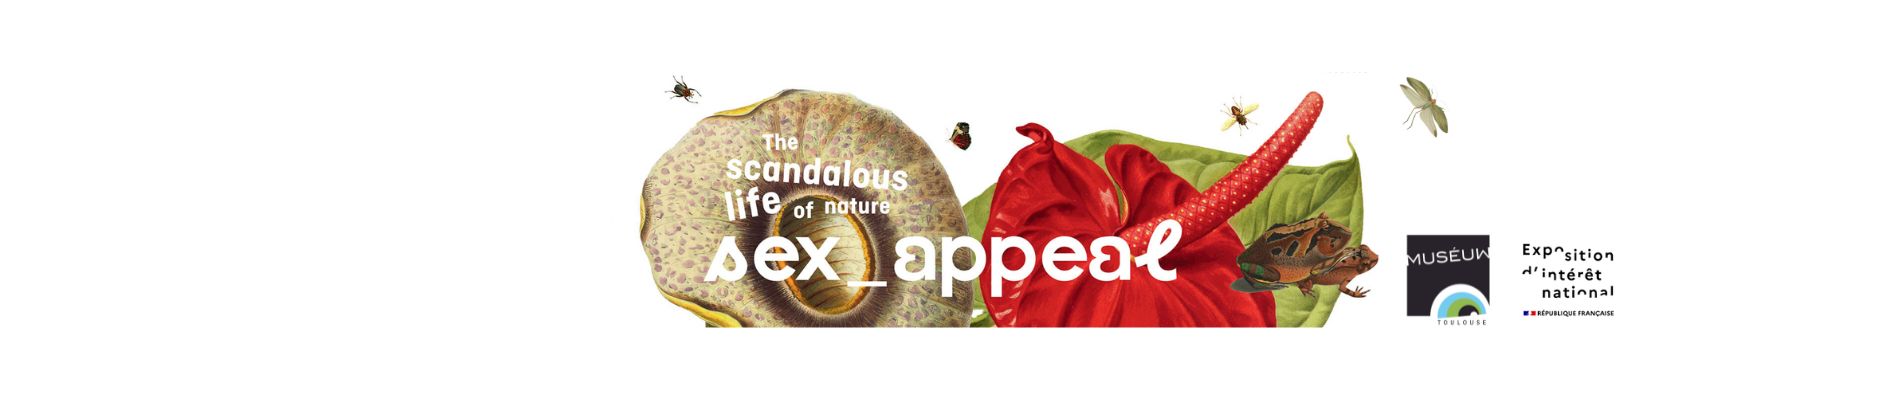 Sex Appeal, the scandalous life of nature